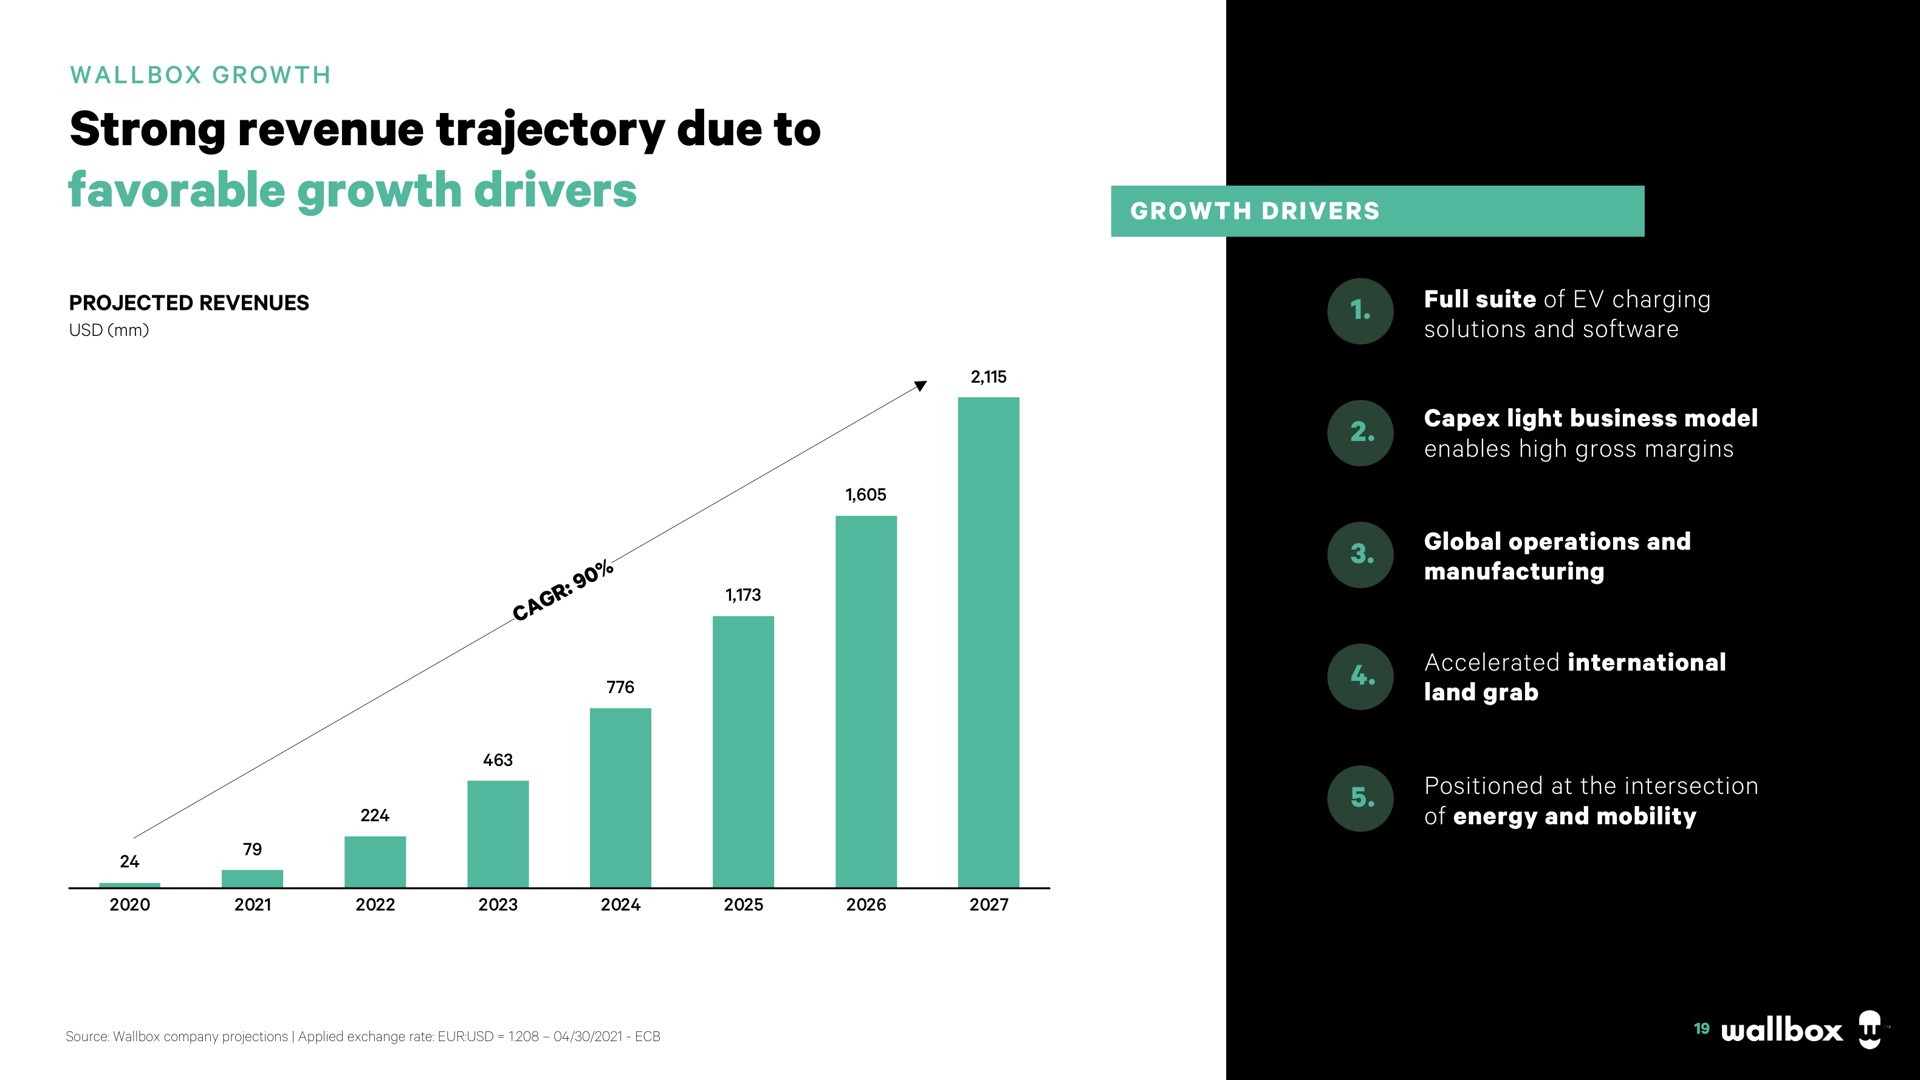 strong revenue trajectory due to favorable growth drivers | Wallbox